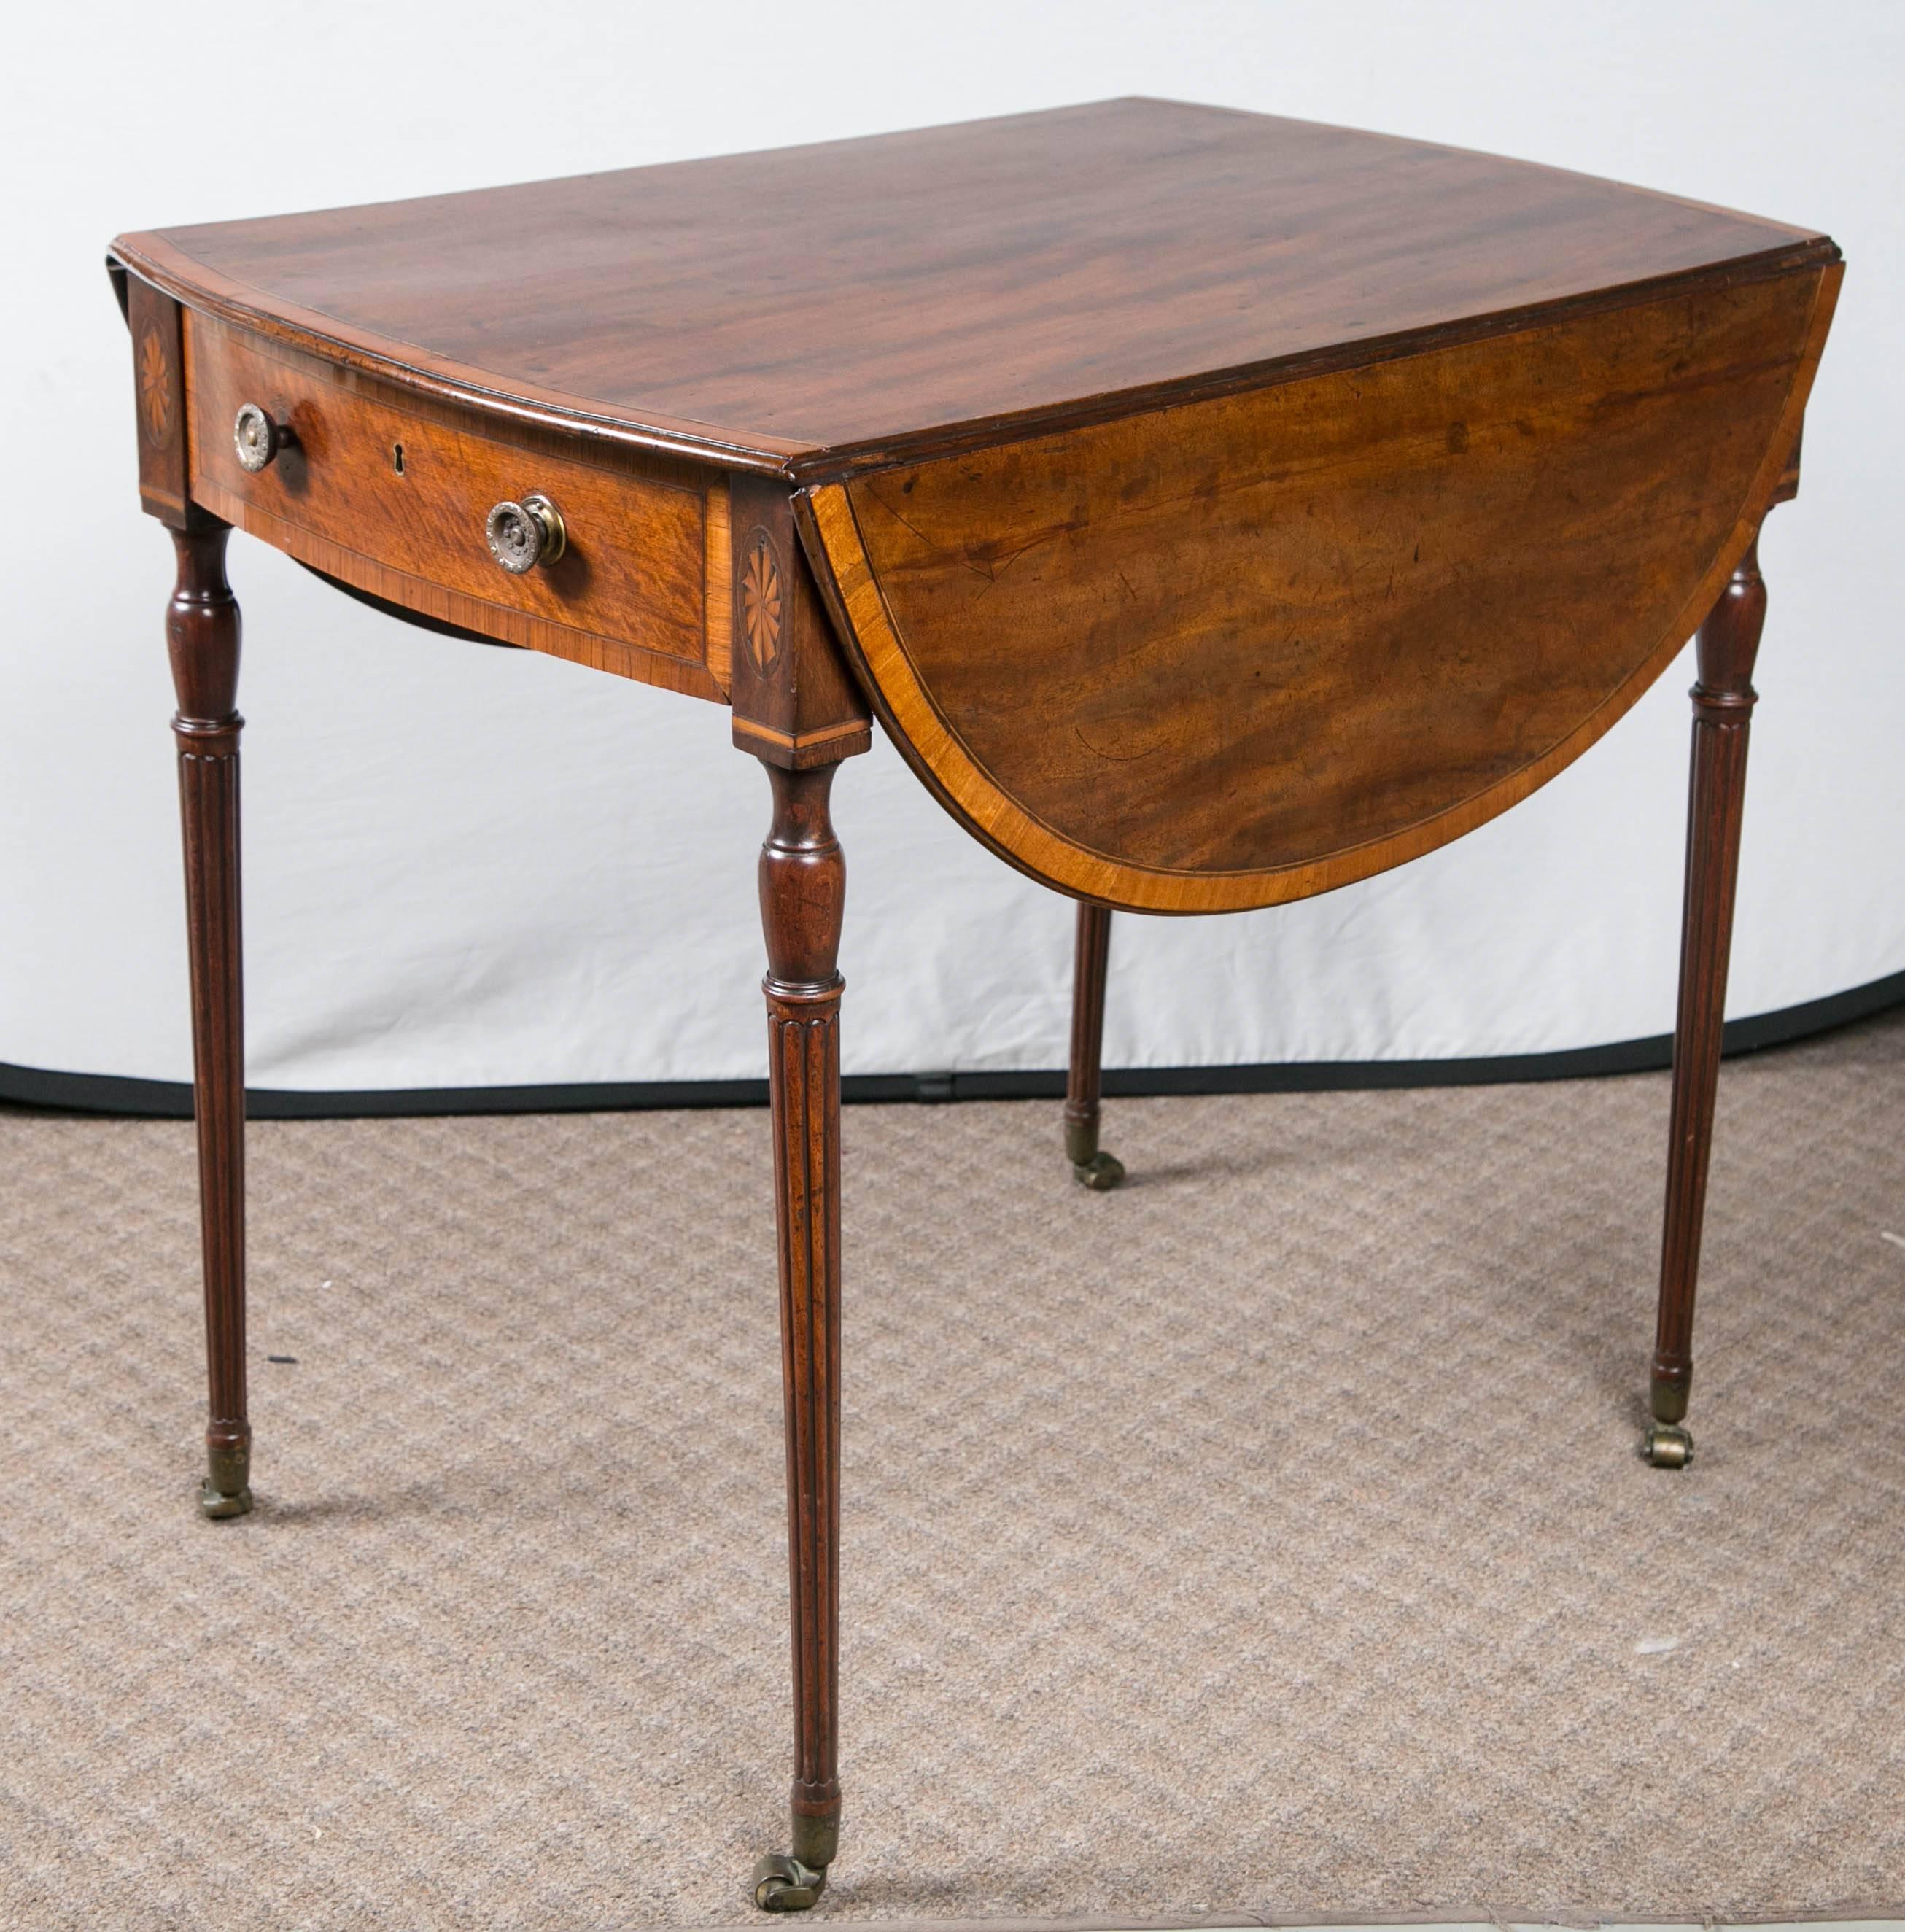 English Pembroke table on casters with satinwood banding, circa 1790-1805.